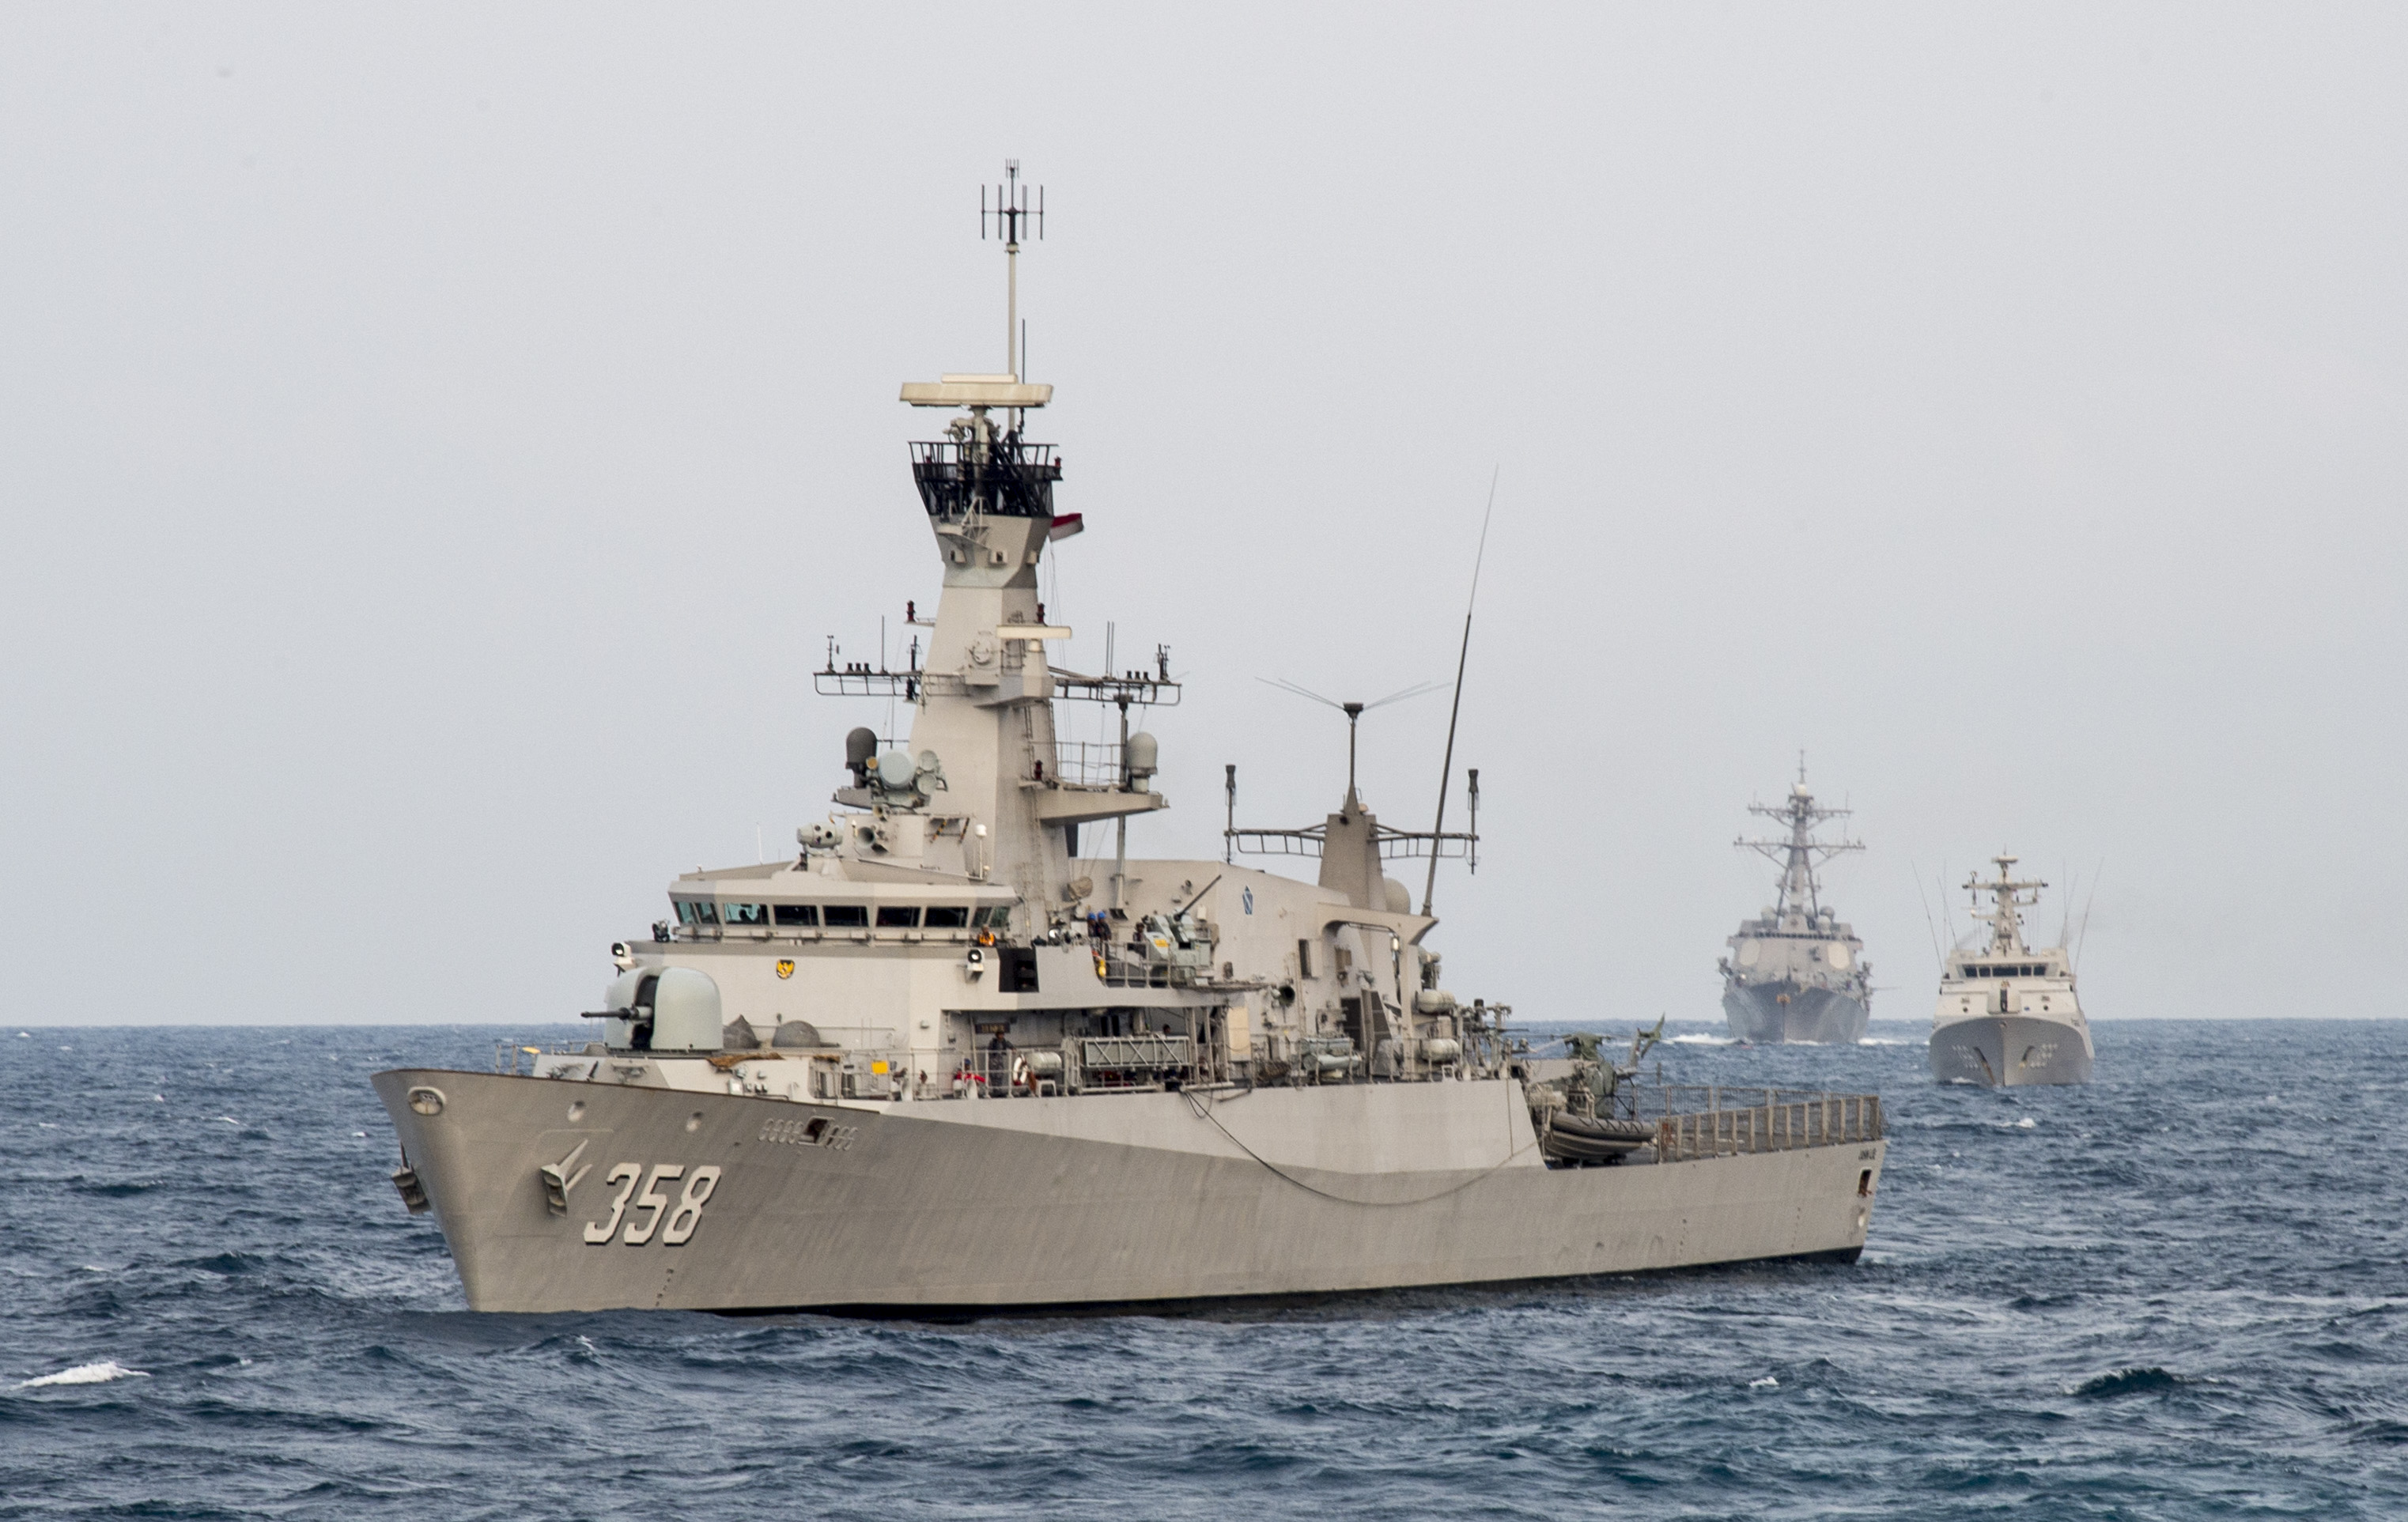 Indonesian Navy corvette KRI John Lie (358) lines up for a combined gunnery exercise. US Navy Photo